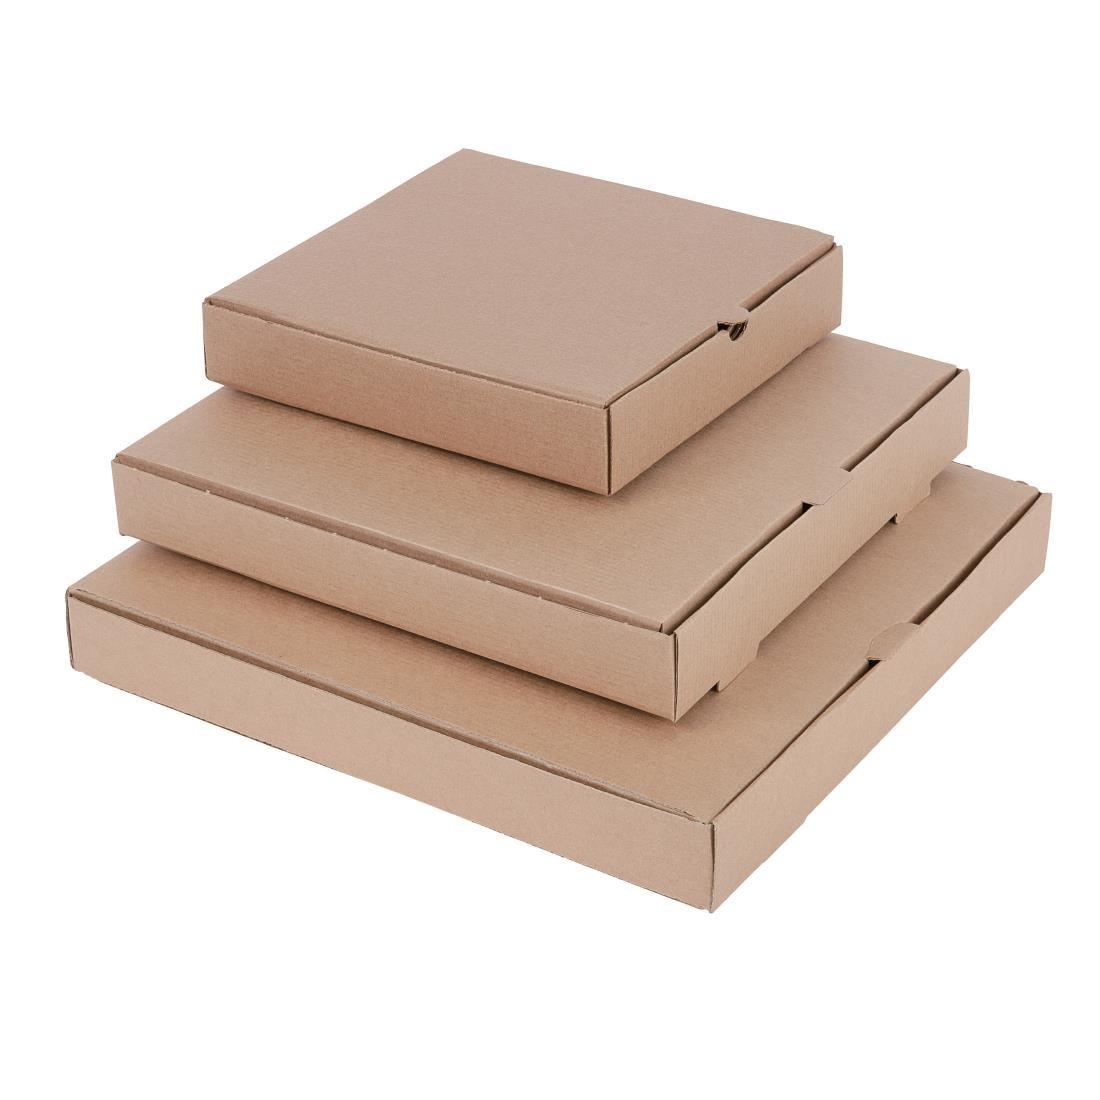 Fiesta Compostable Plain Pizza Boxes 9" (Pack of 100) - DC723  - 4